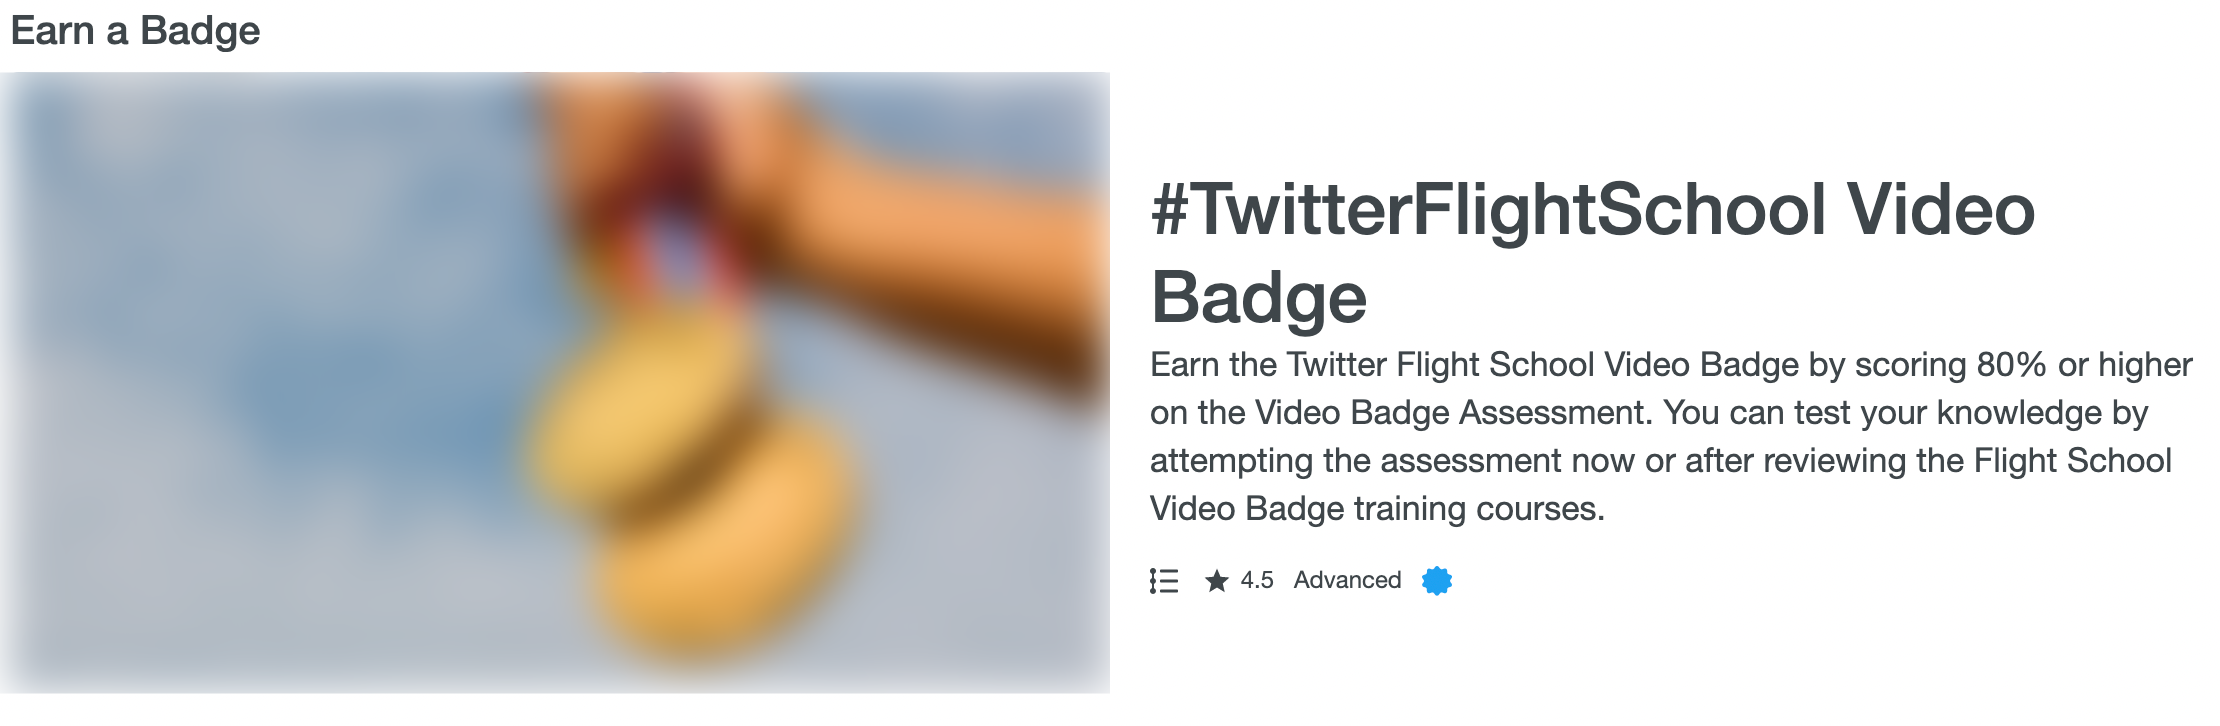 Earning badges and certifications from Twitter Flight School.